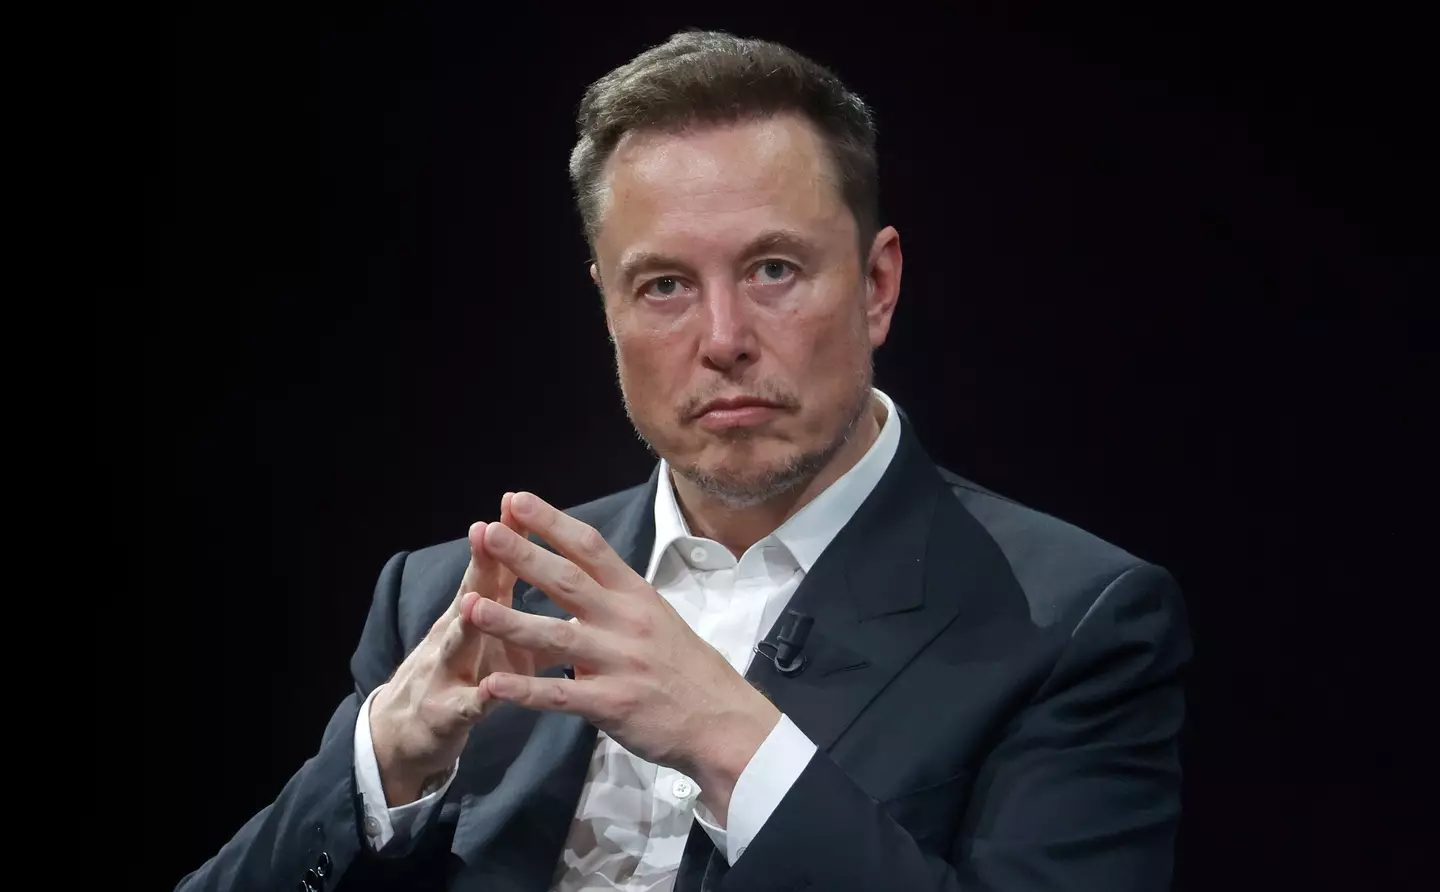 Twitter, headed by Elon Musk, have threatened a lawsuit.